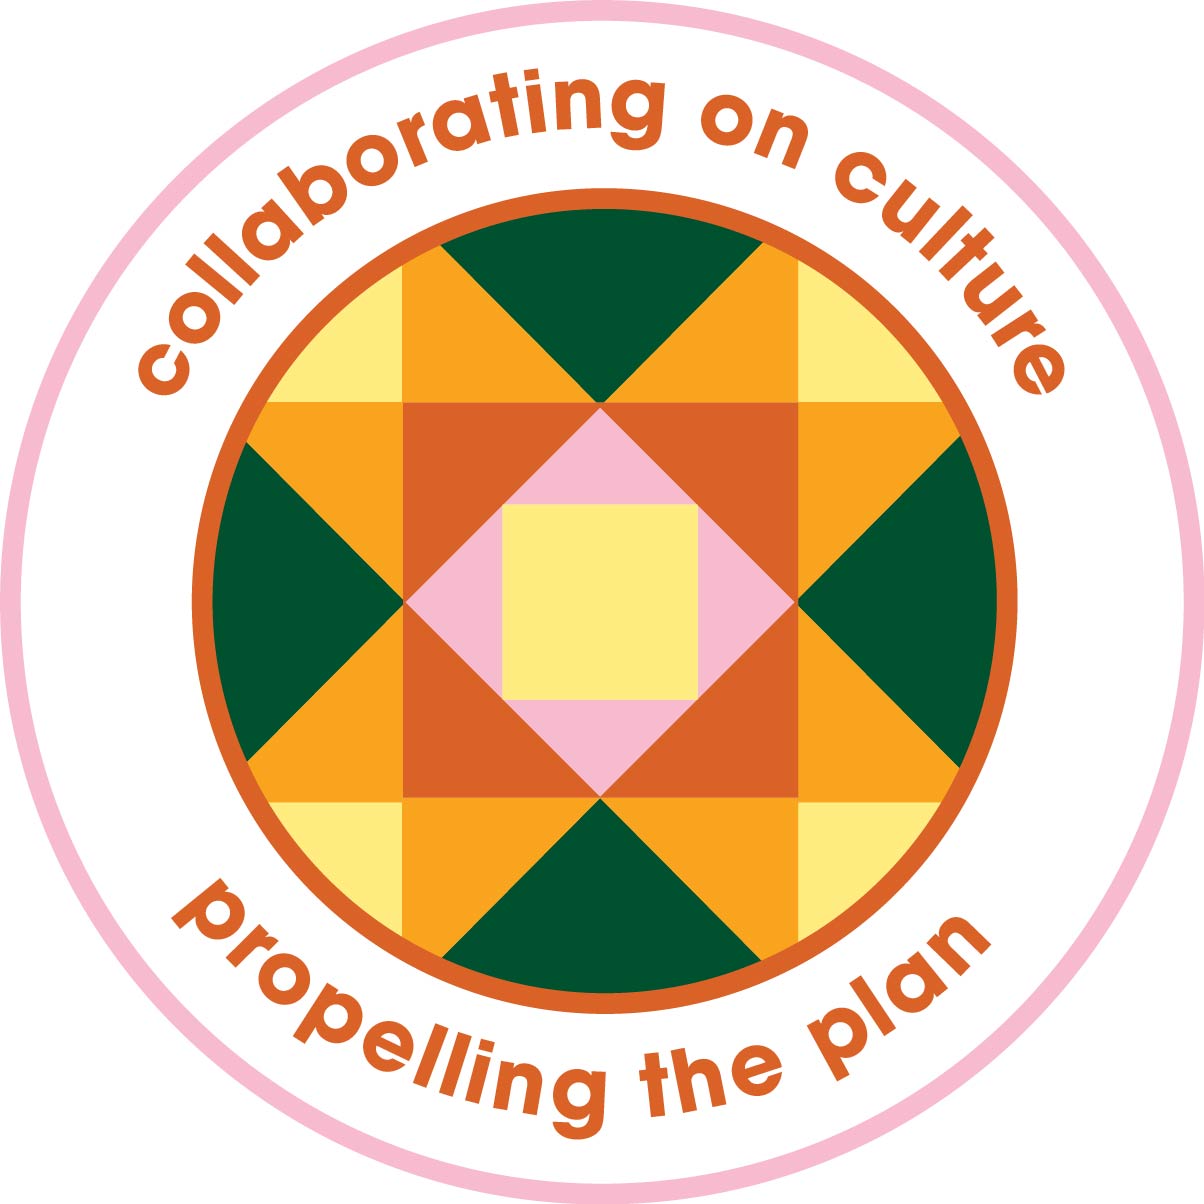 A logo with the text "Collaborating on Culture, Propelling the Plan"